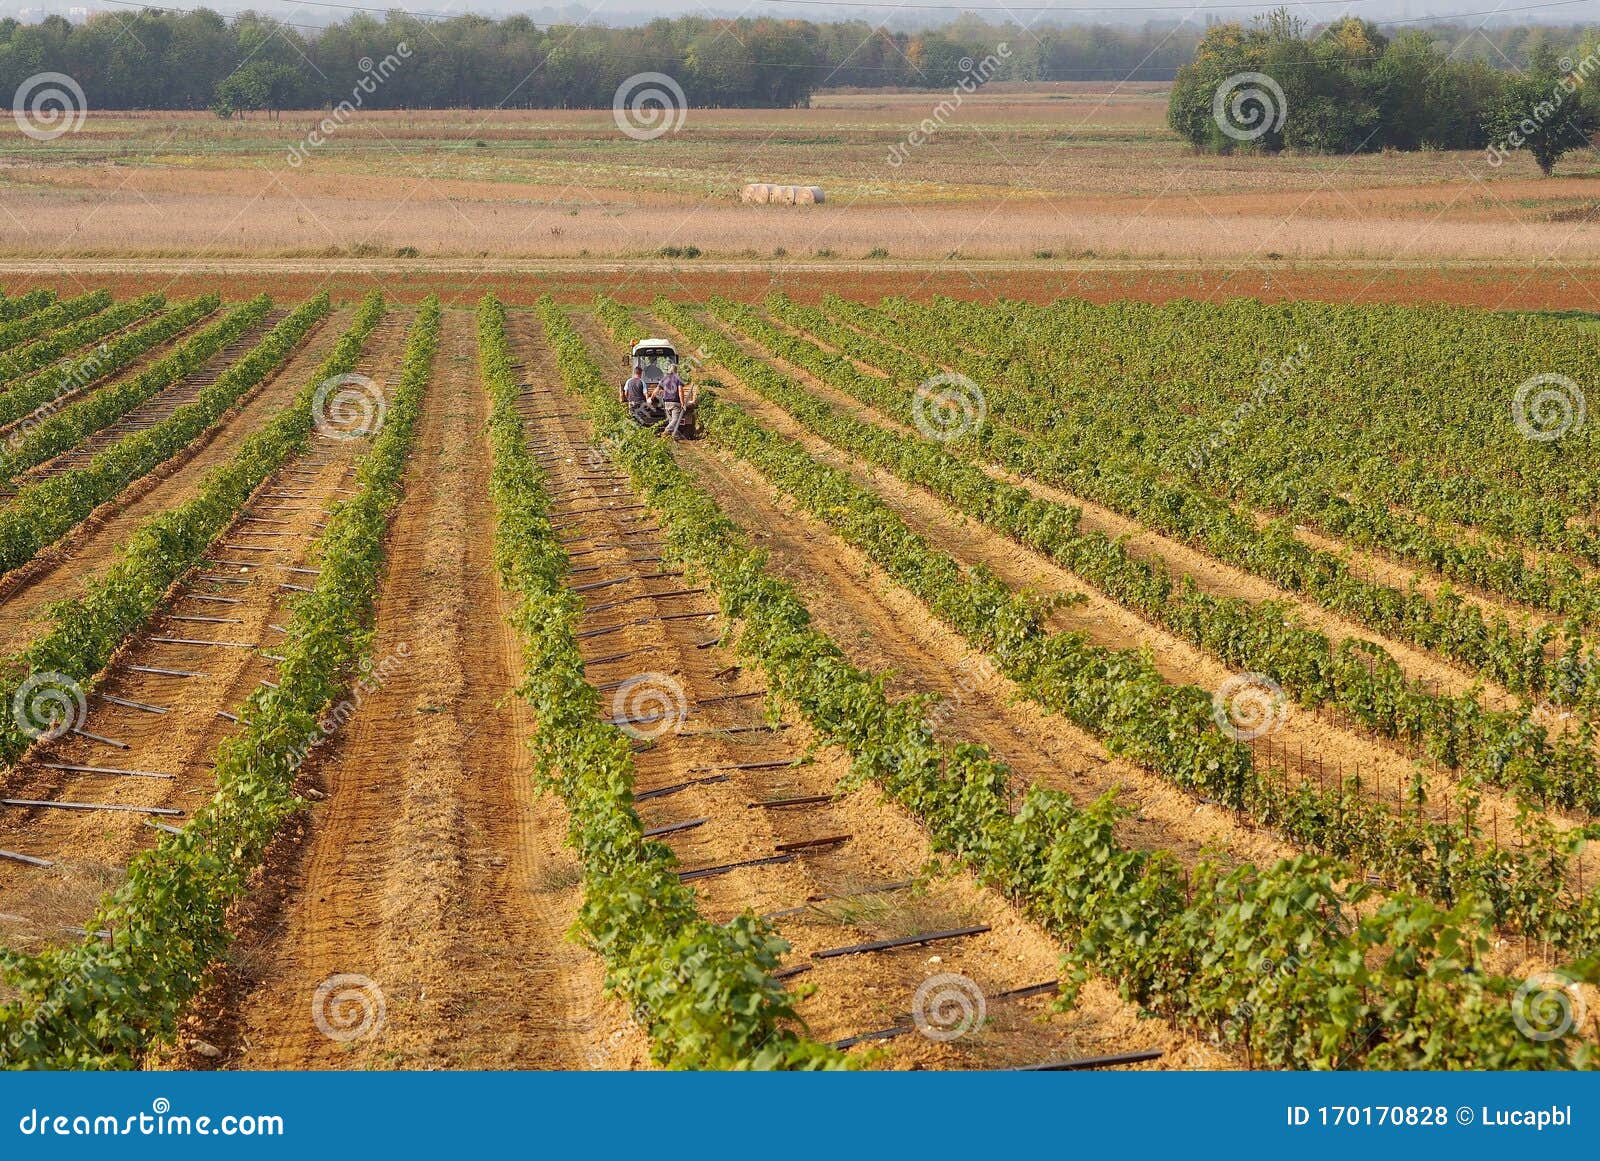 winemakers at work to plant new rows of vines with rooted grafts, in a plain of north italy